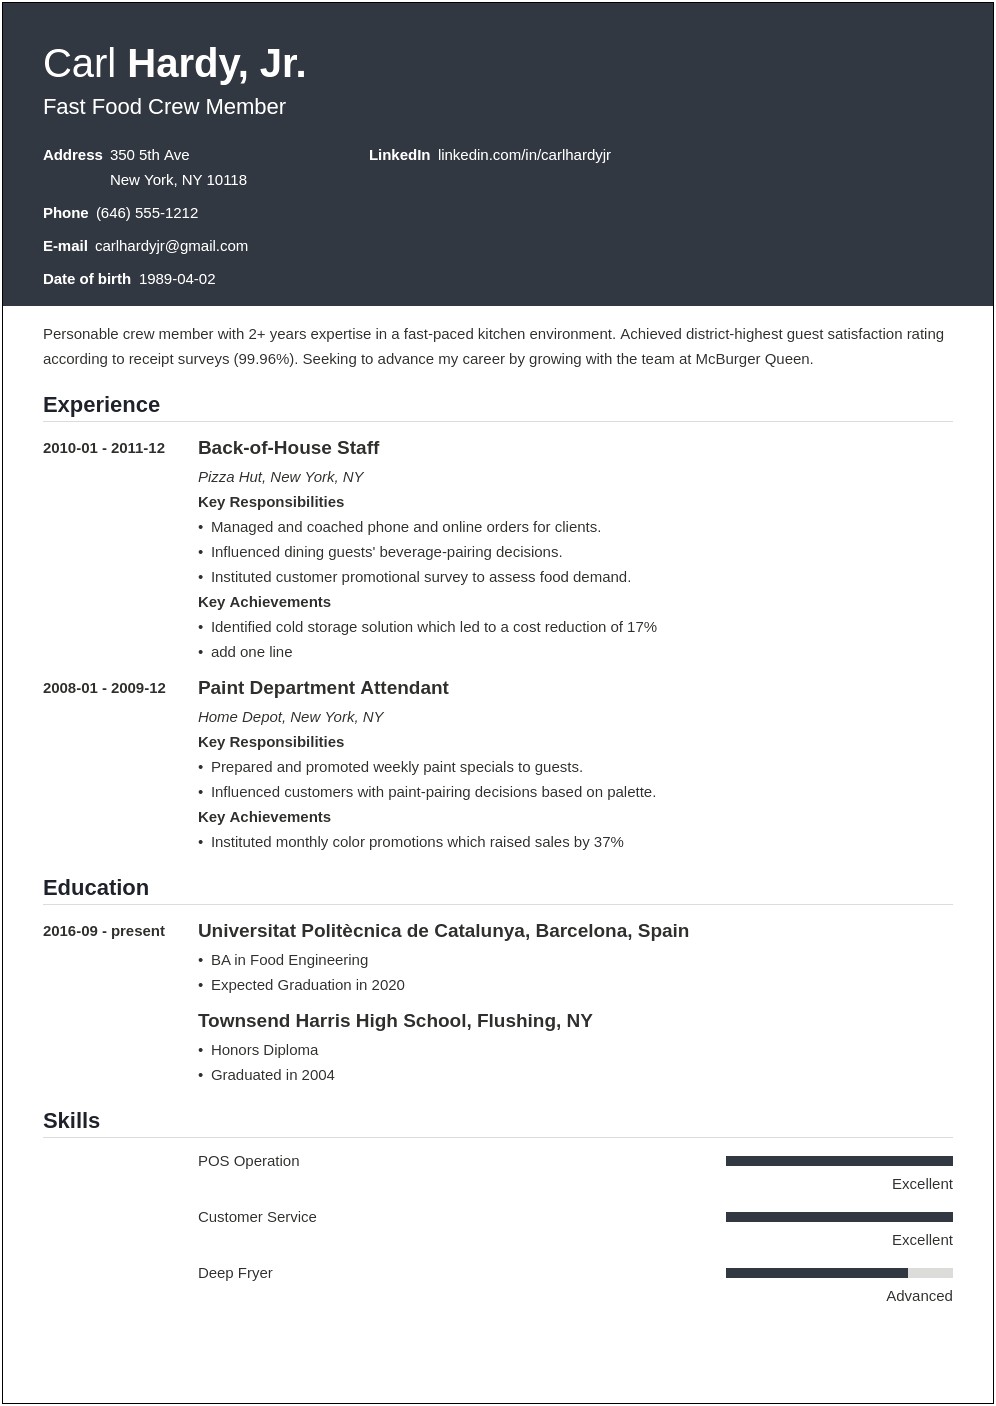 Resume Objective For Fast Food Worker